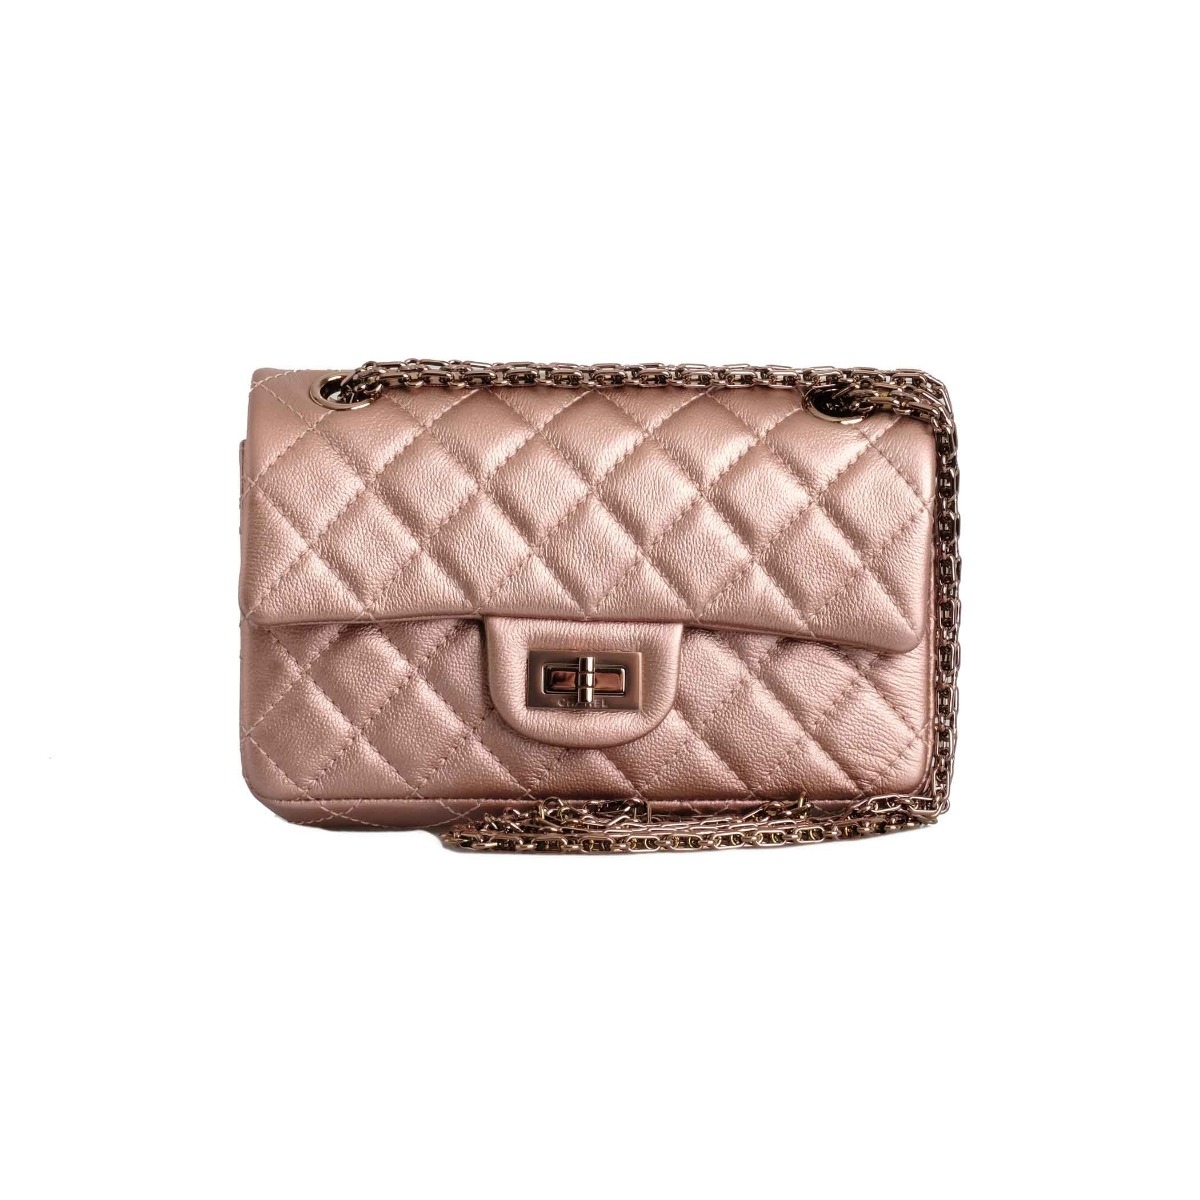 Pre-owned Chanel Mini Reissue 224 2.55 Flap Rose Gold Calfskin Rose Gold  Hardware